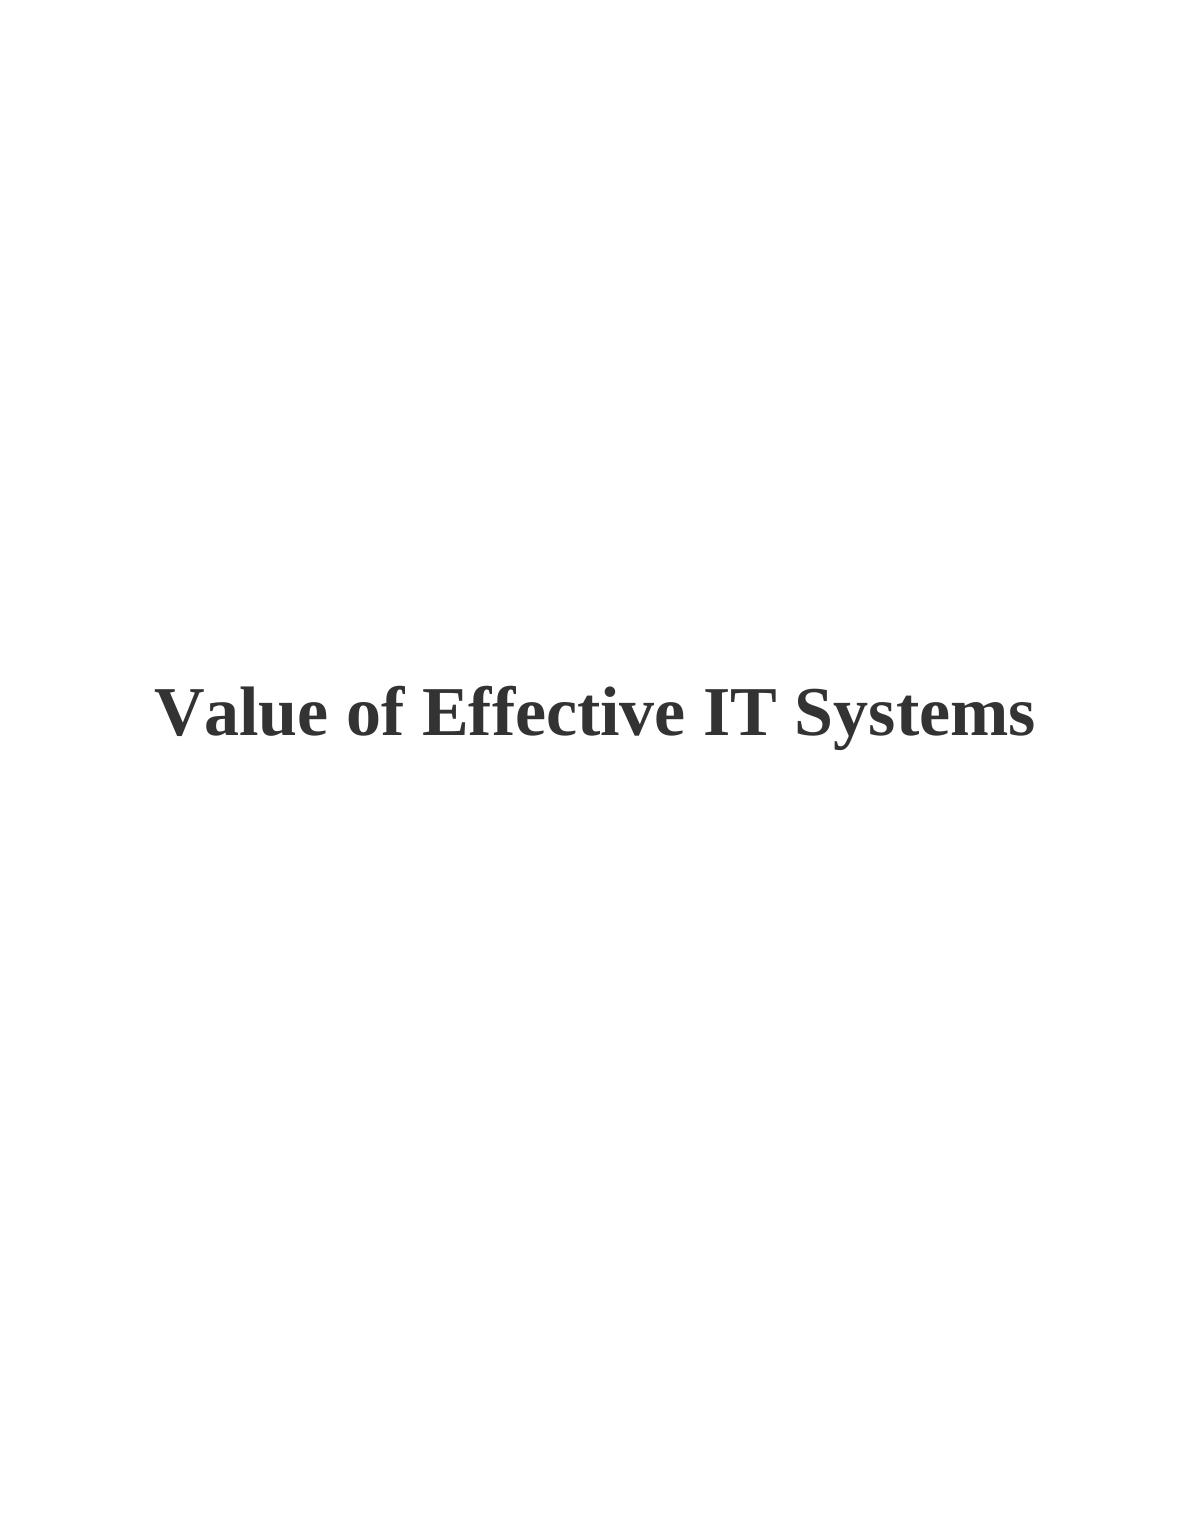 Report on Value of Effective IT Systems_1